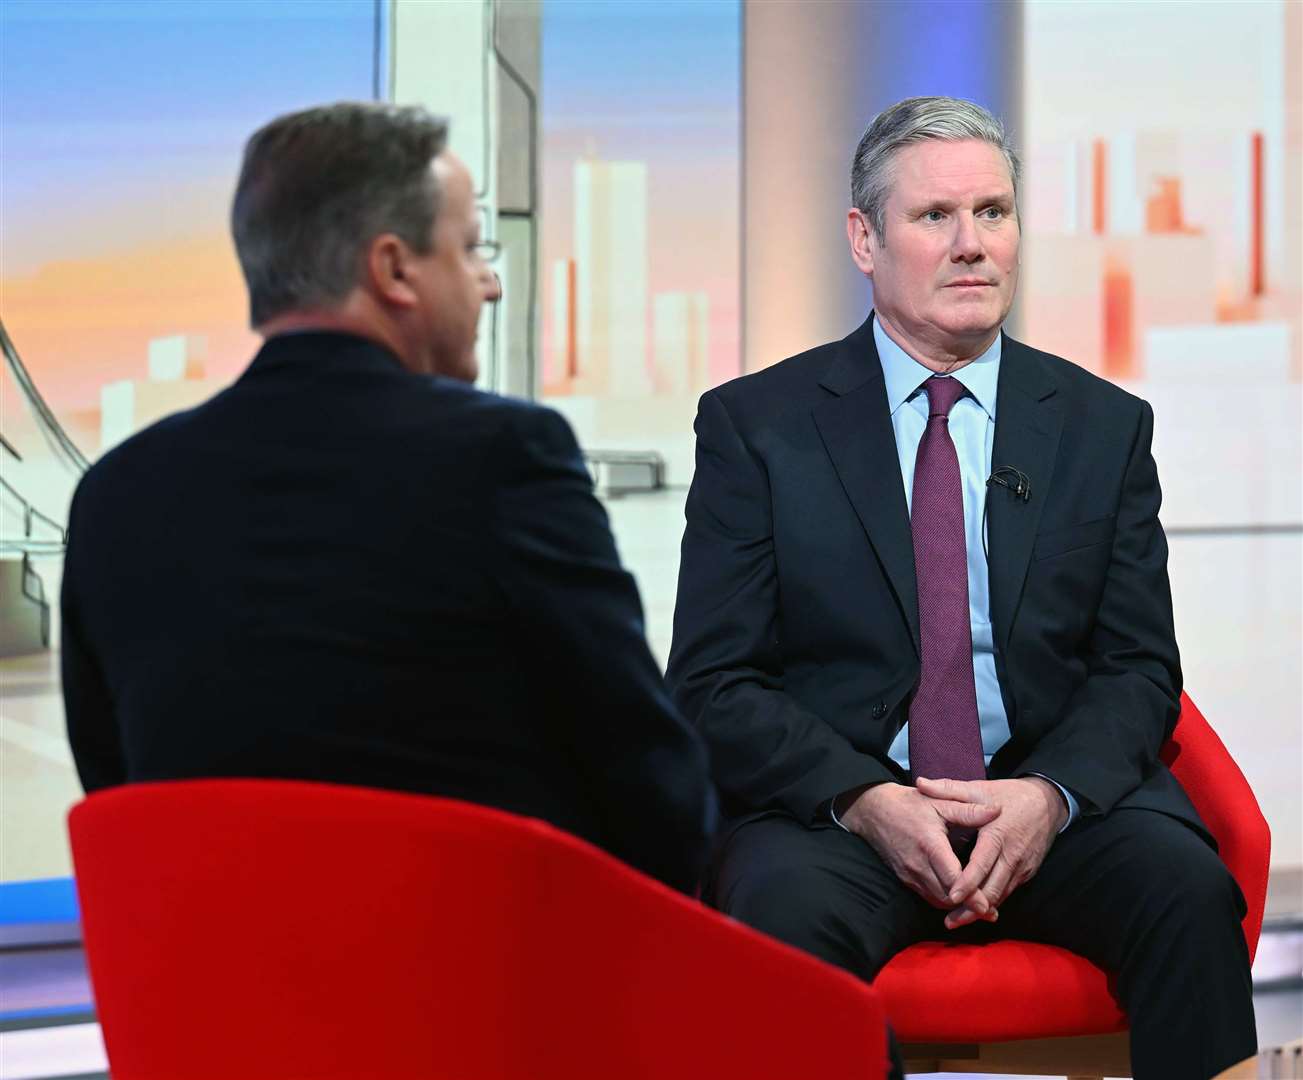 Labour leader Sir Keir Starmer agreed with Lord Cameron that the boats need to be stopped (Jeff Overs/BBC/PA)